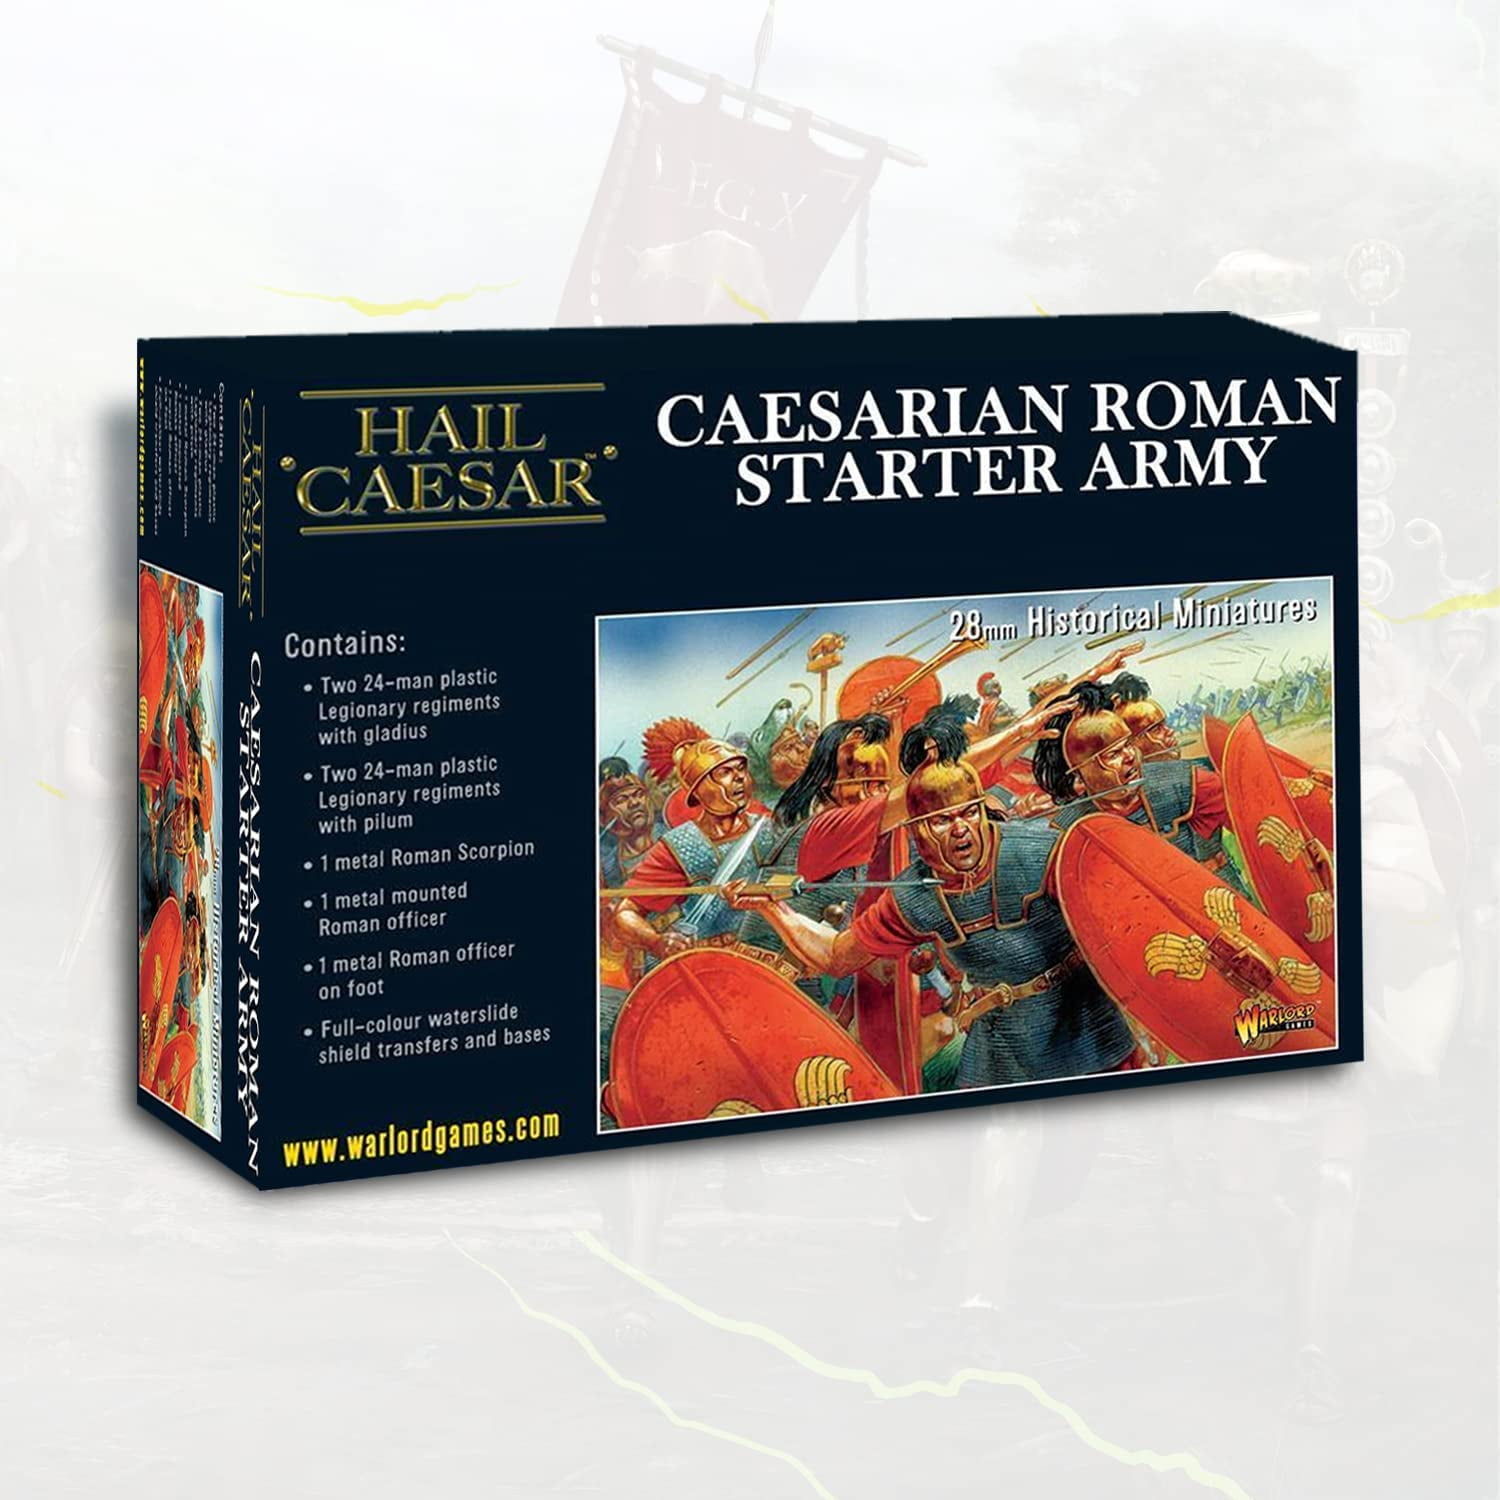 Picture of Warlord Games WRL109911101 Hail Caesar Caesarian Roman Starter Army Miniature